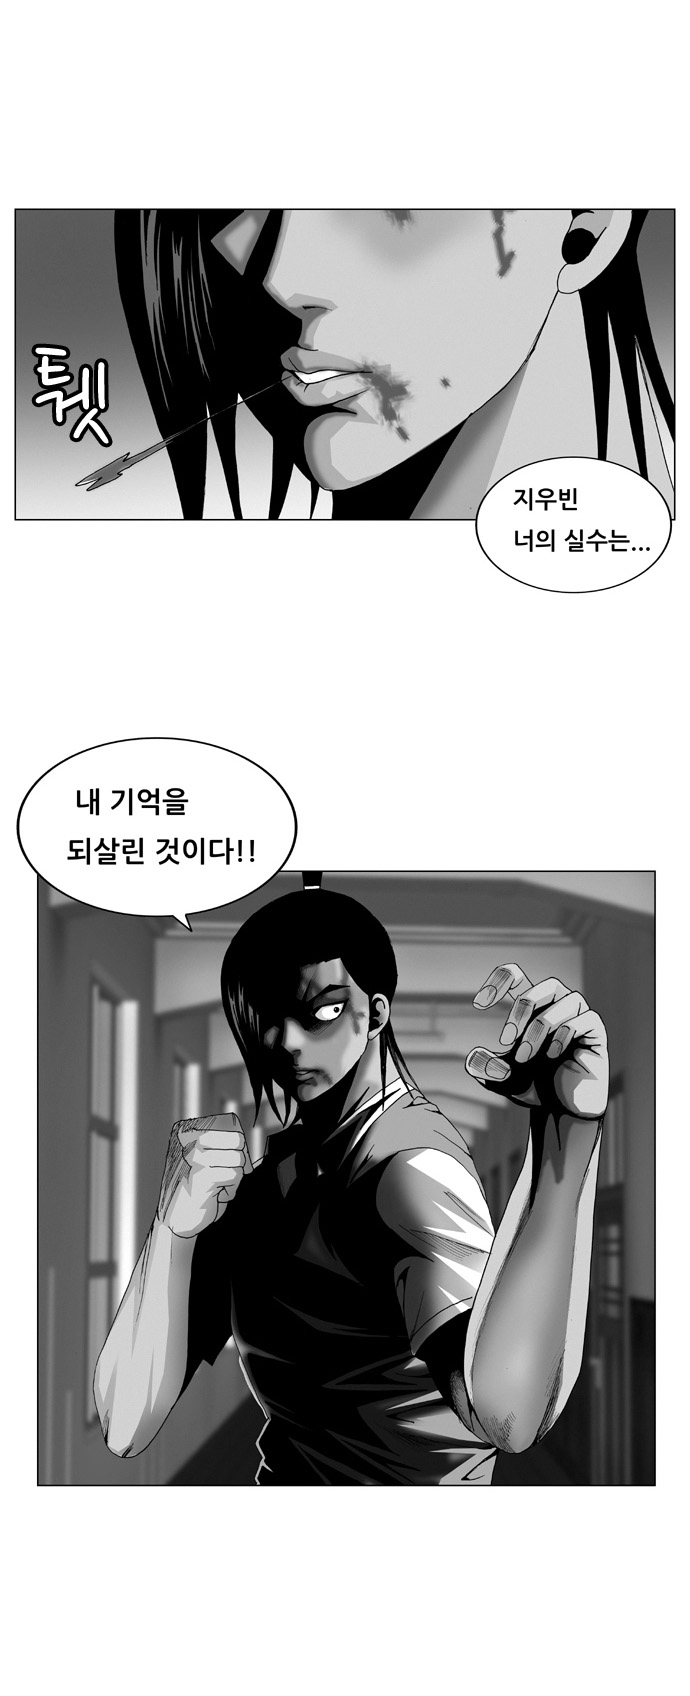 Ultimate Legend - Kang Hae Hyo - Chapter 55 - Page 1